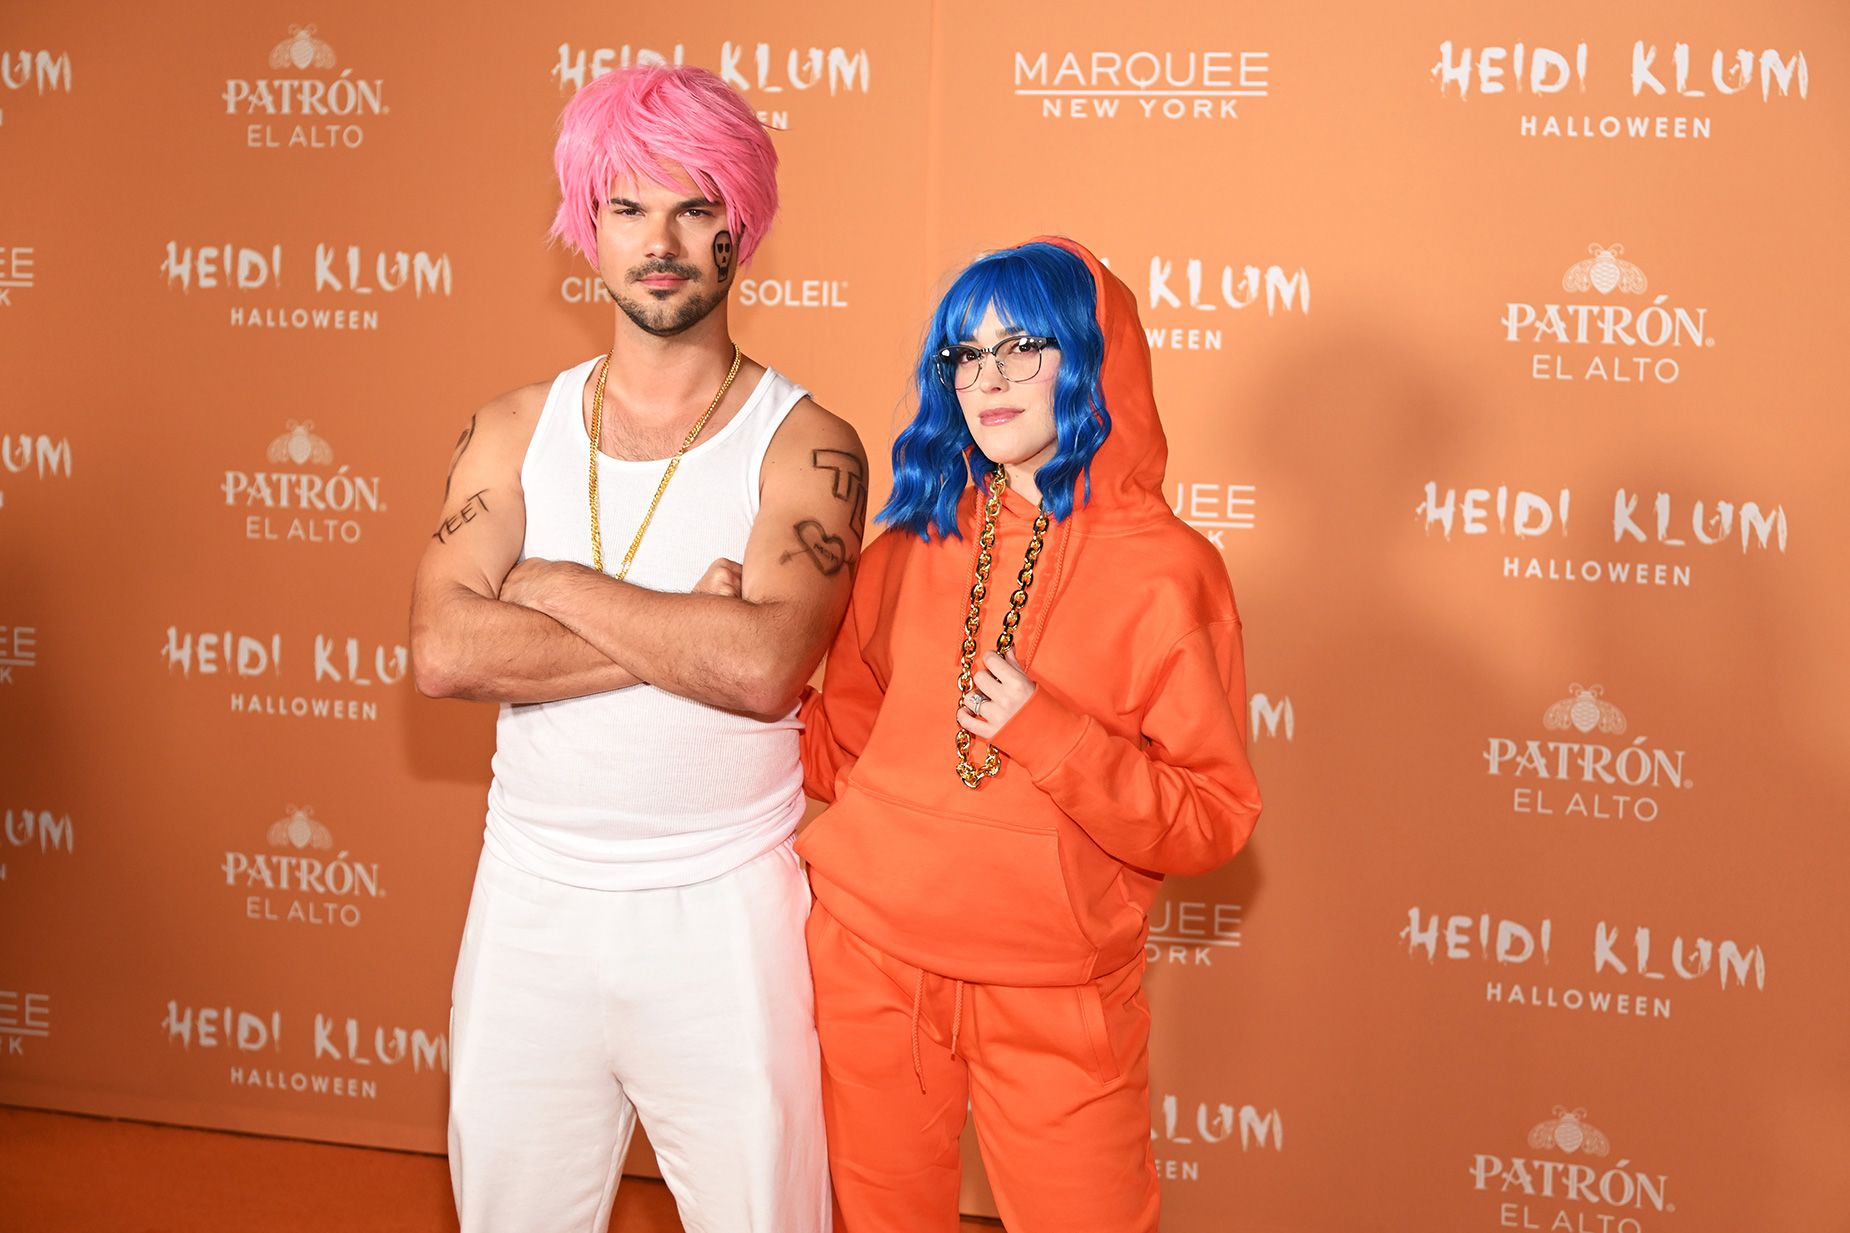 Taylor Lautner and Taylor Dome dressed as Timothée Chalamet and Pete Davidson from their 2020 